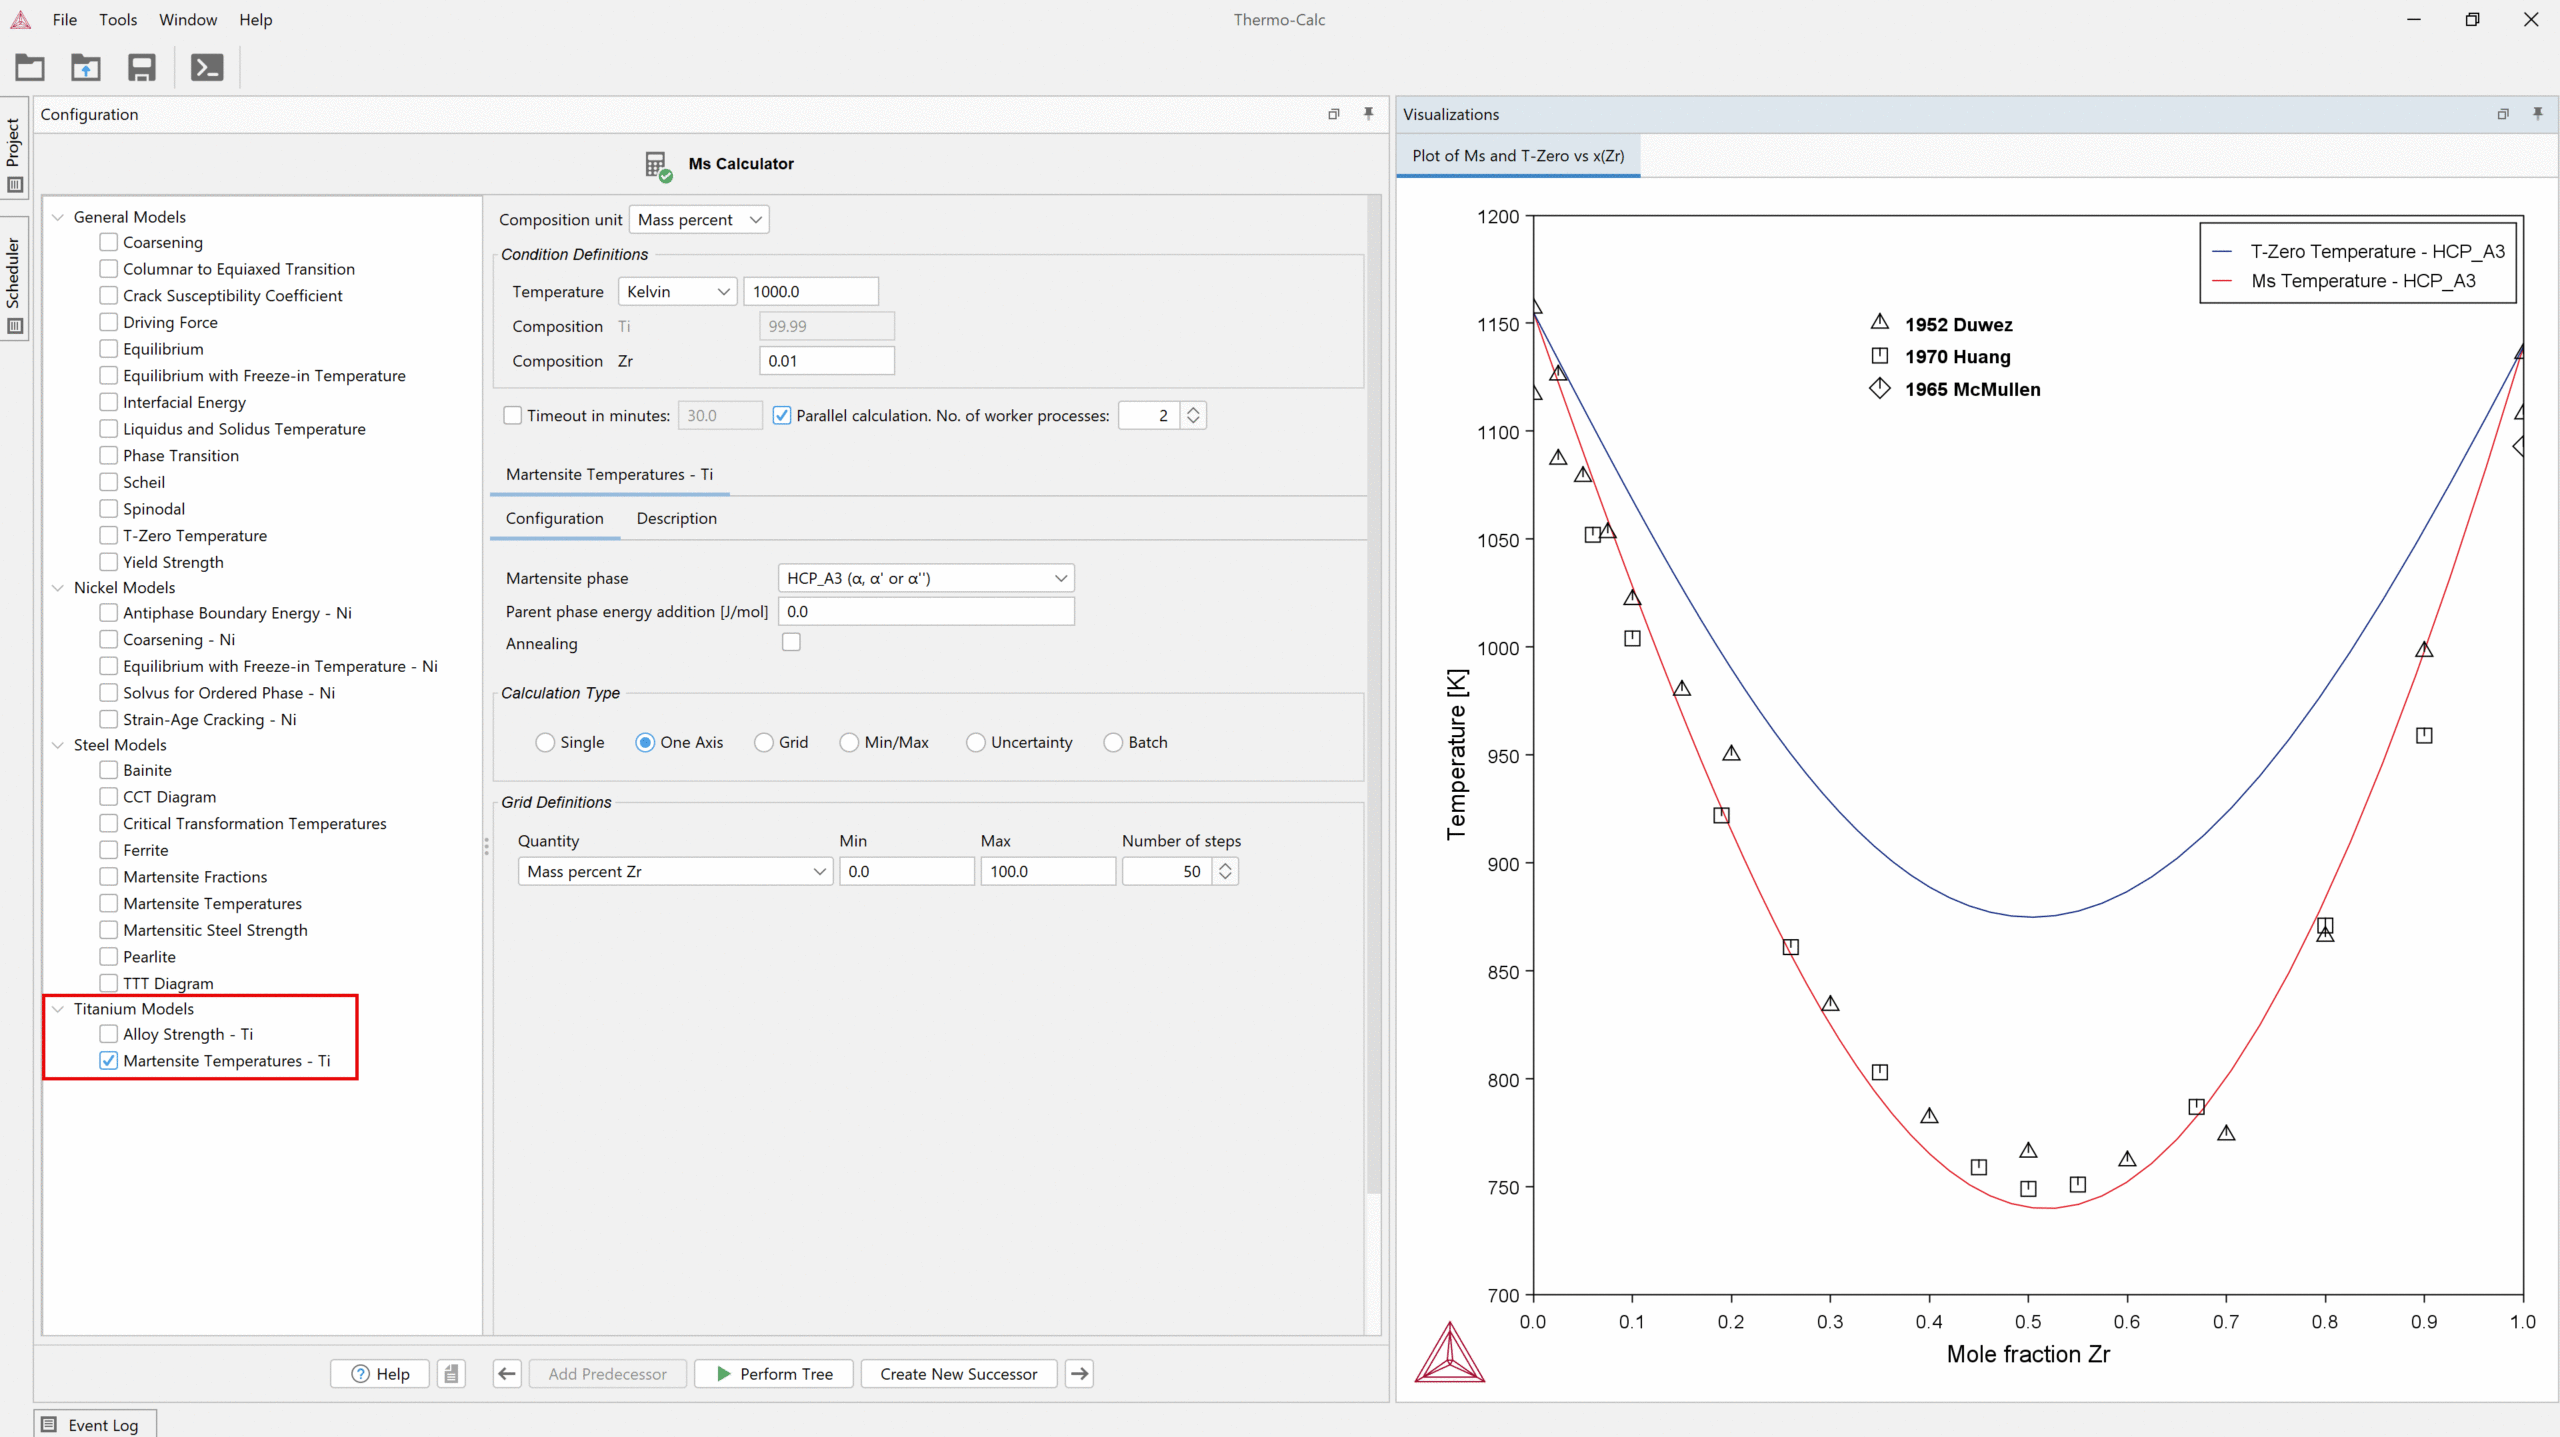 A screenshot of the new Titanium Model Library showing the Ms temperature and T-Zero temperature for alpha martensite as a function of the mole fraction of Zr with experimental data.